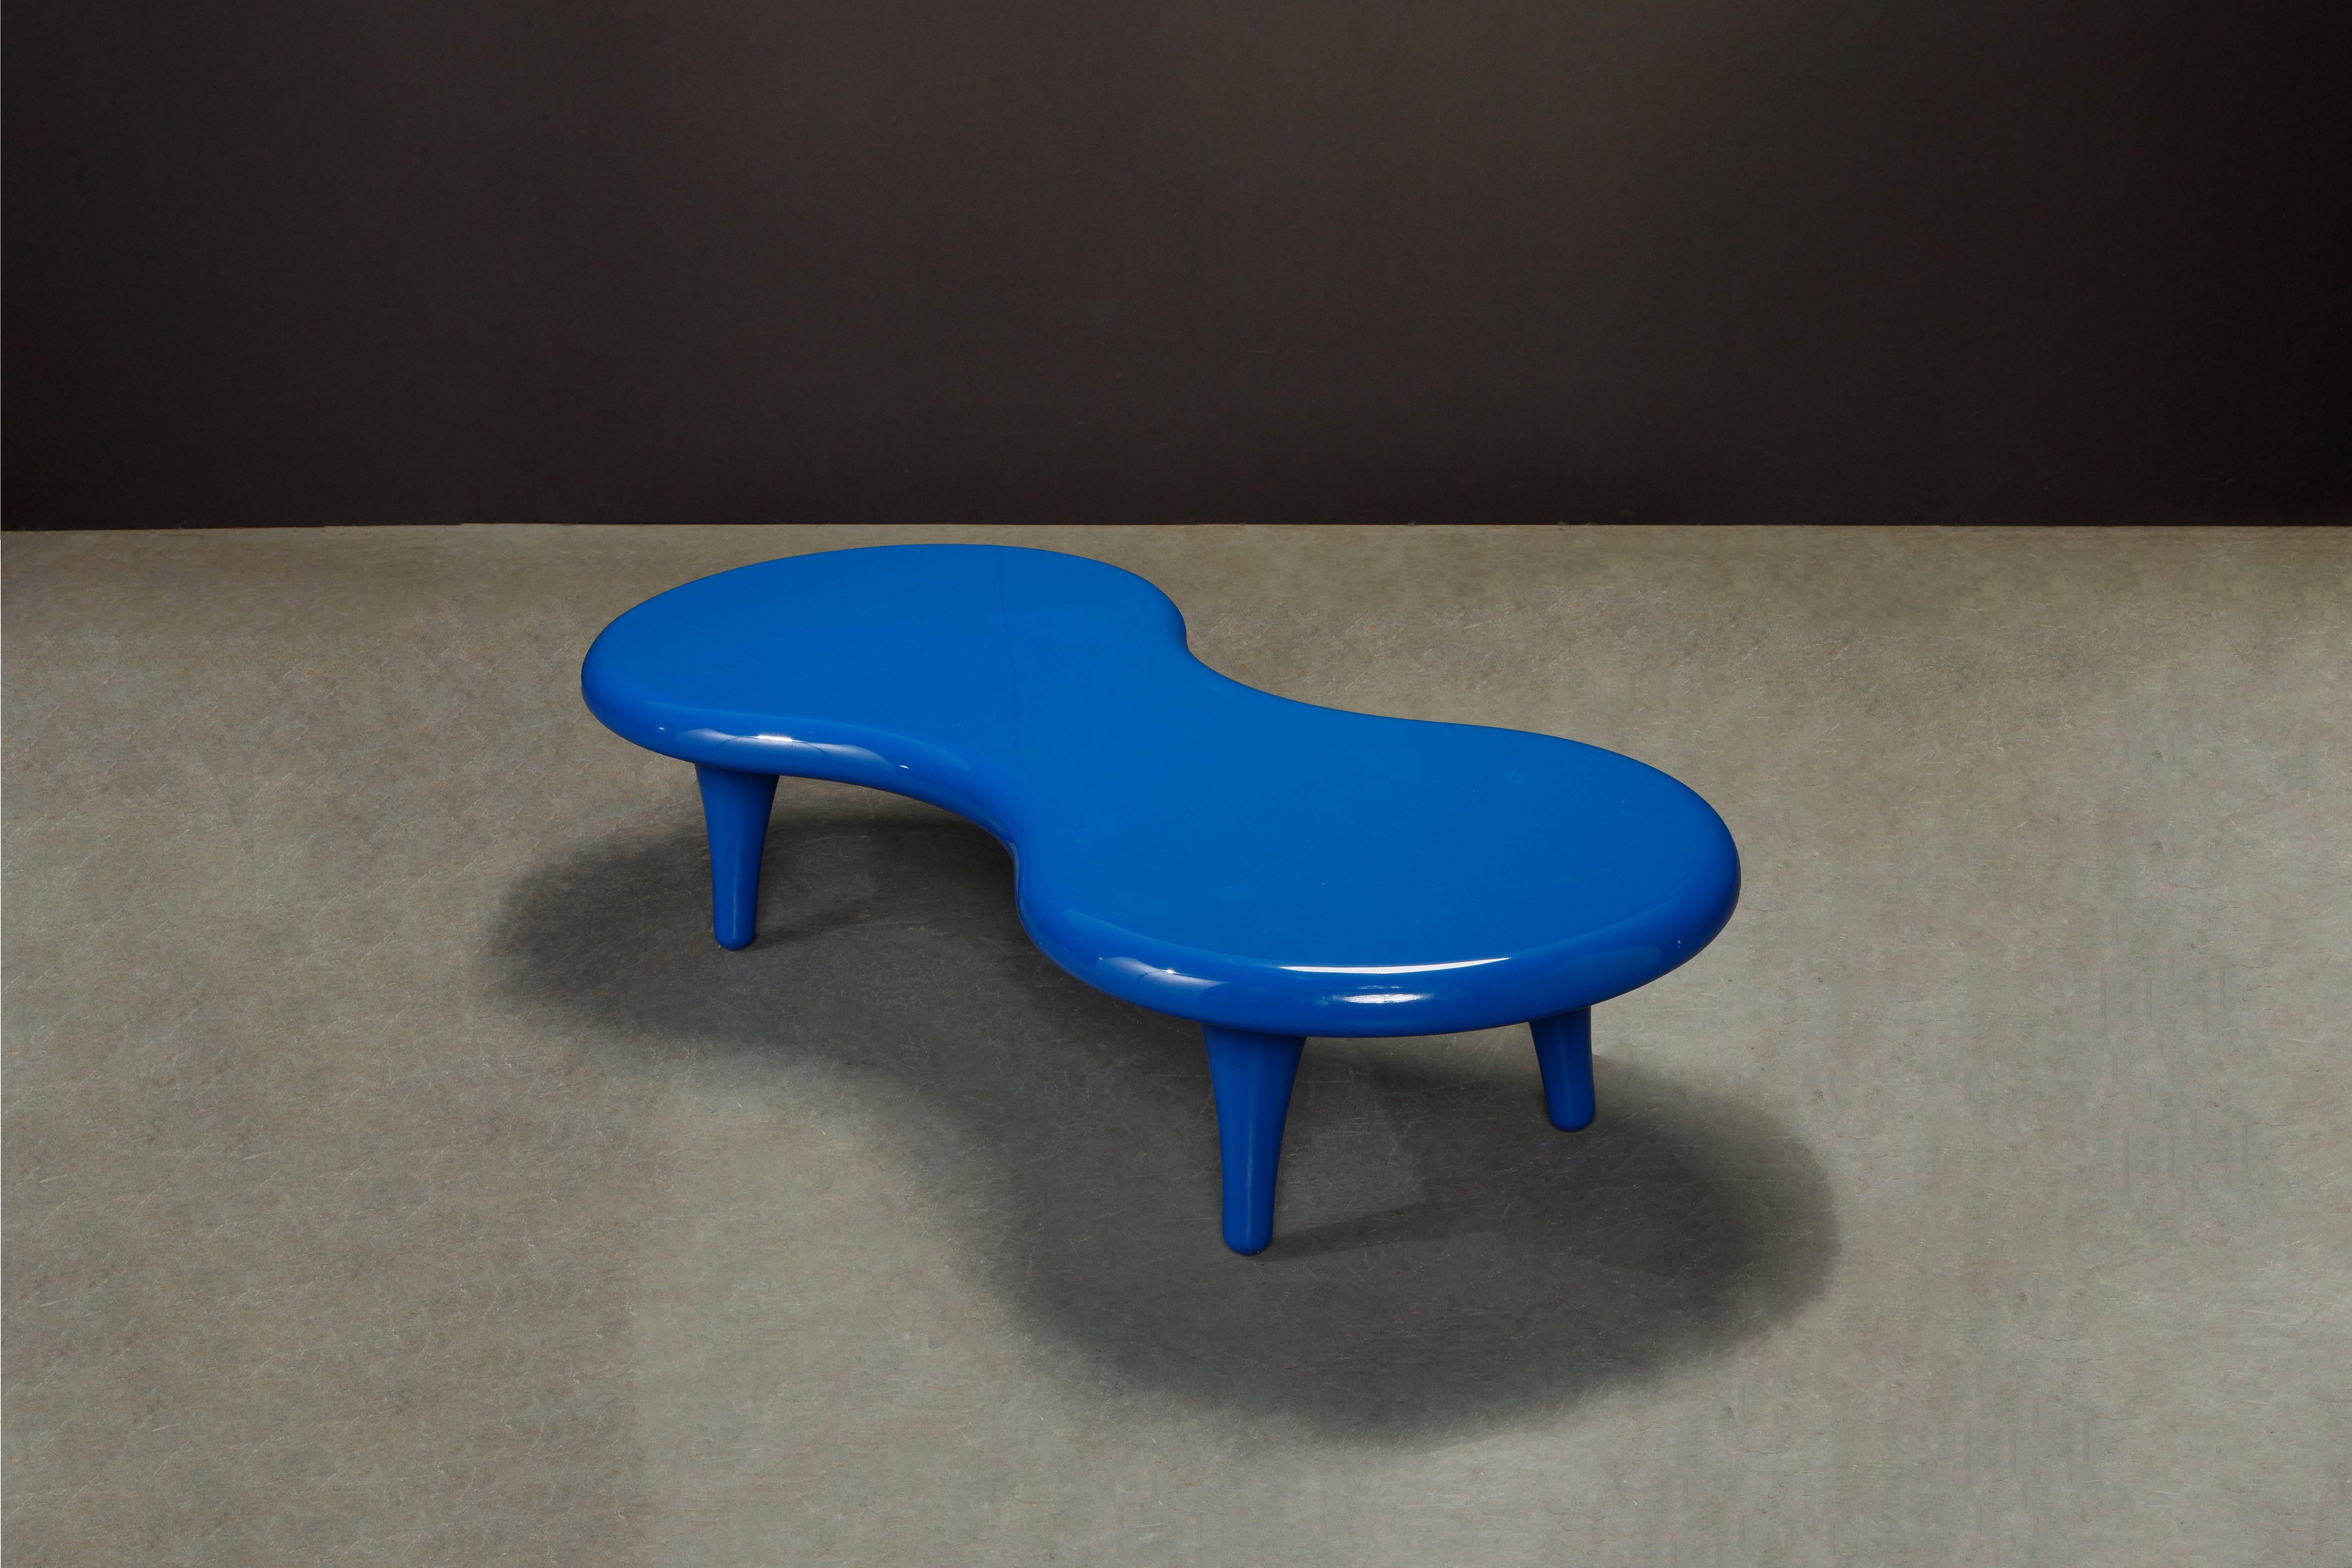 'Orgone' Fiberglass Cocktail Table by Marc Newson for Cappellini, Italy, Signed 2